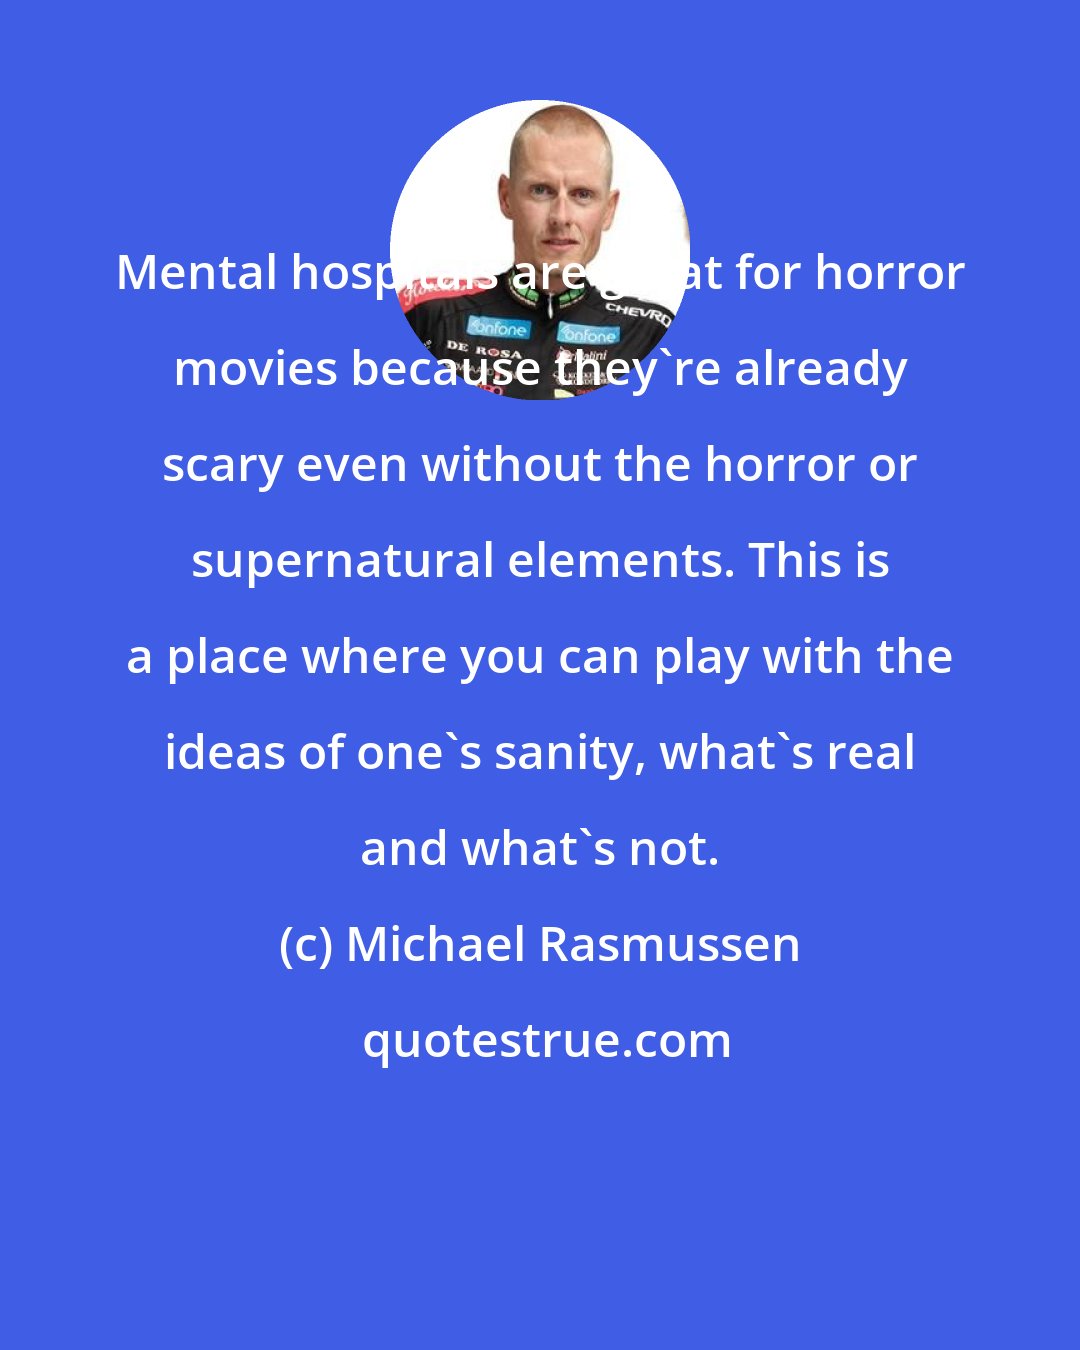 Michael Rasmussen: Mental hospitals are great for horror movies because they're already scary even without the horror or supernatural elements. This is a place where you can play with the ideas of one's sanity, what's real and what's not.